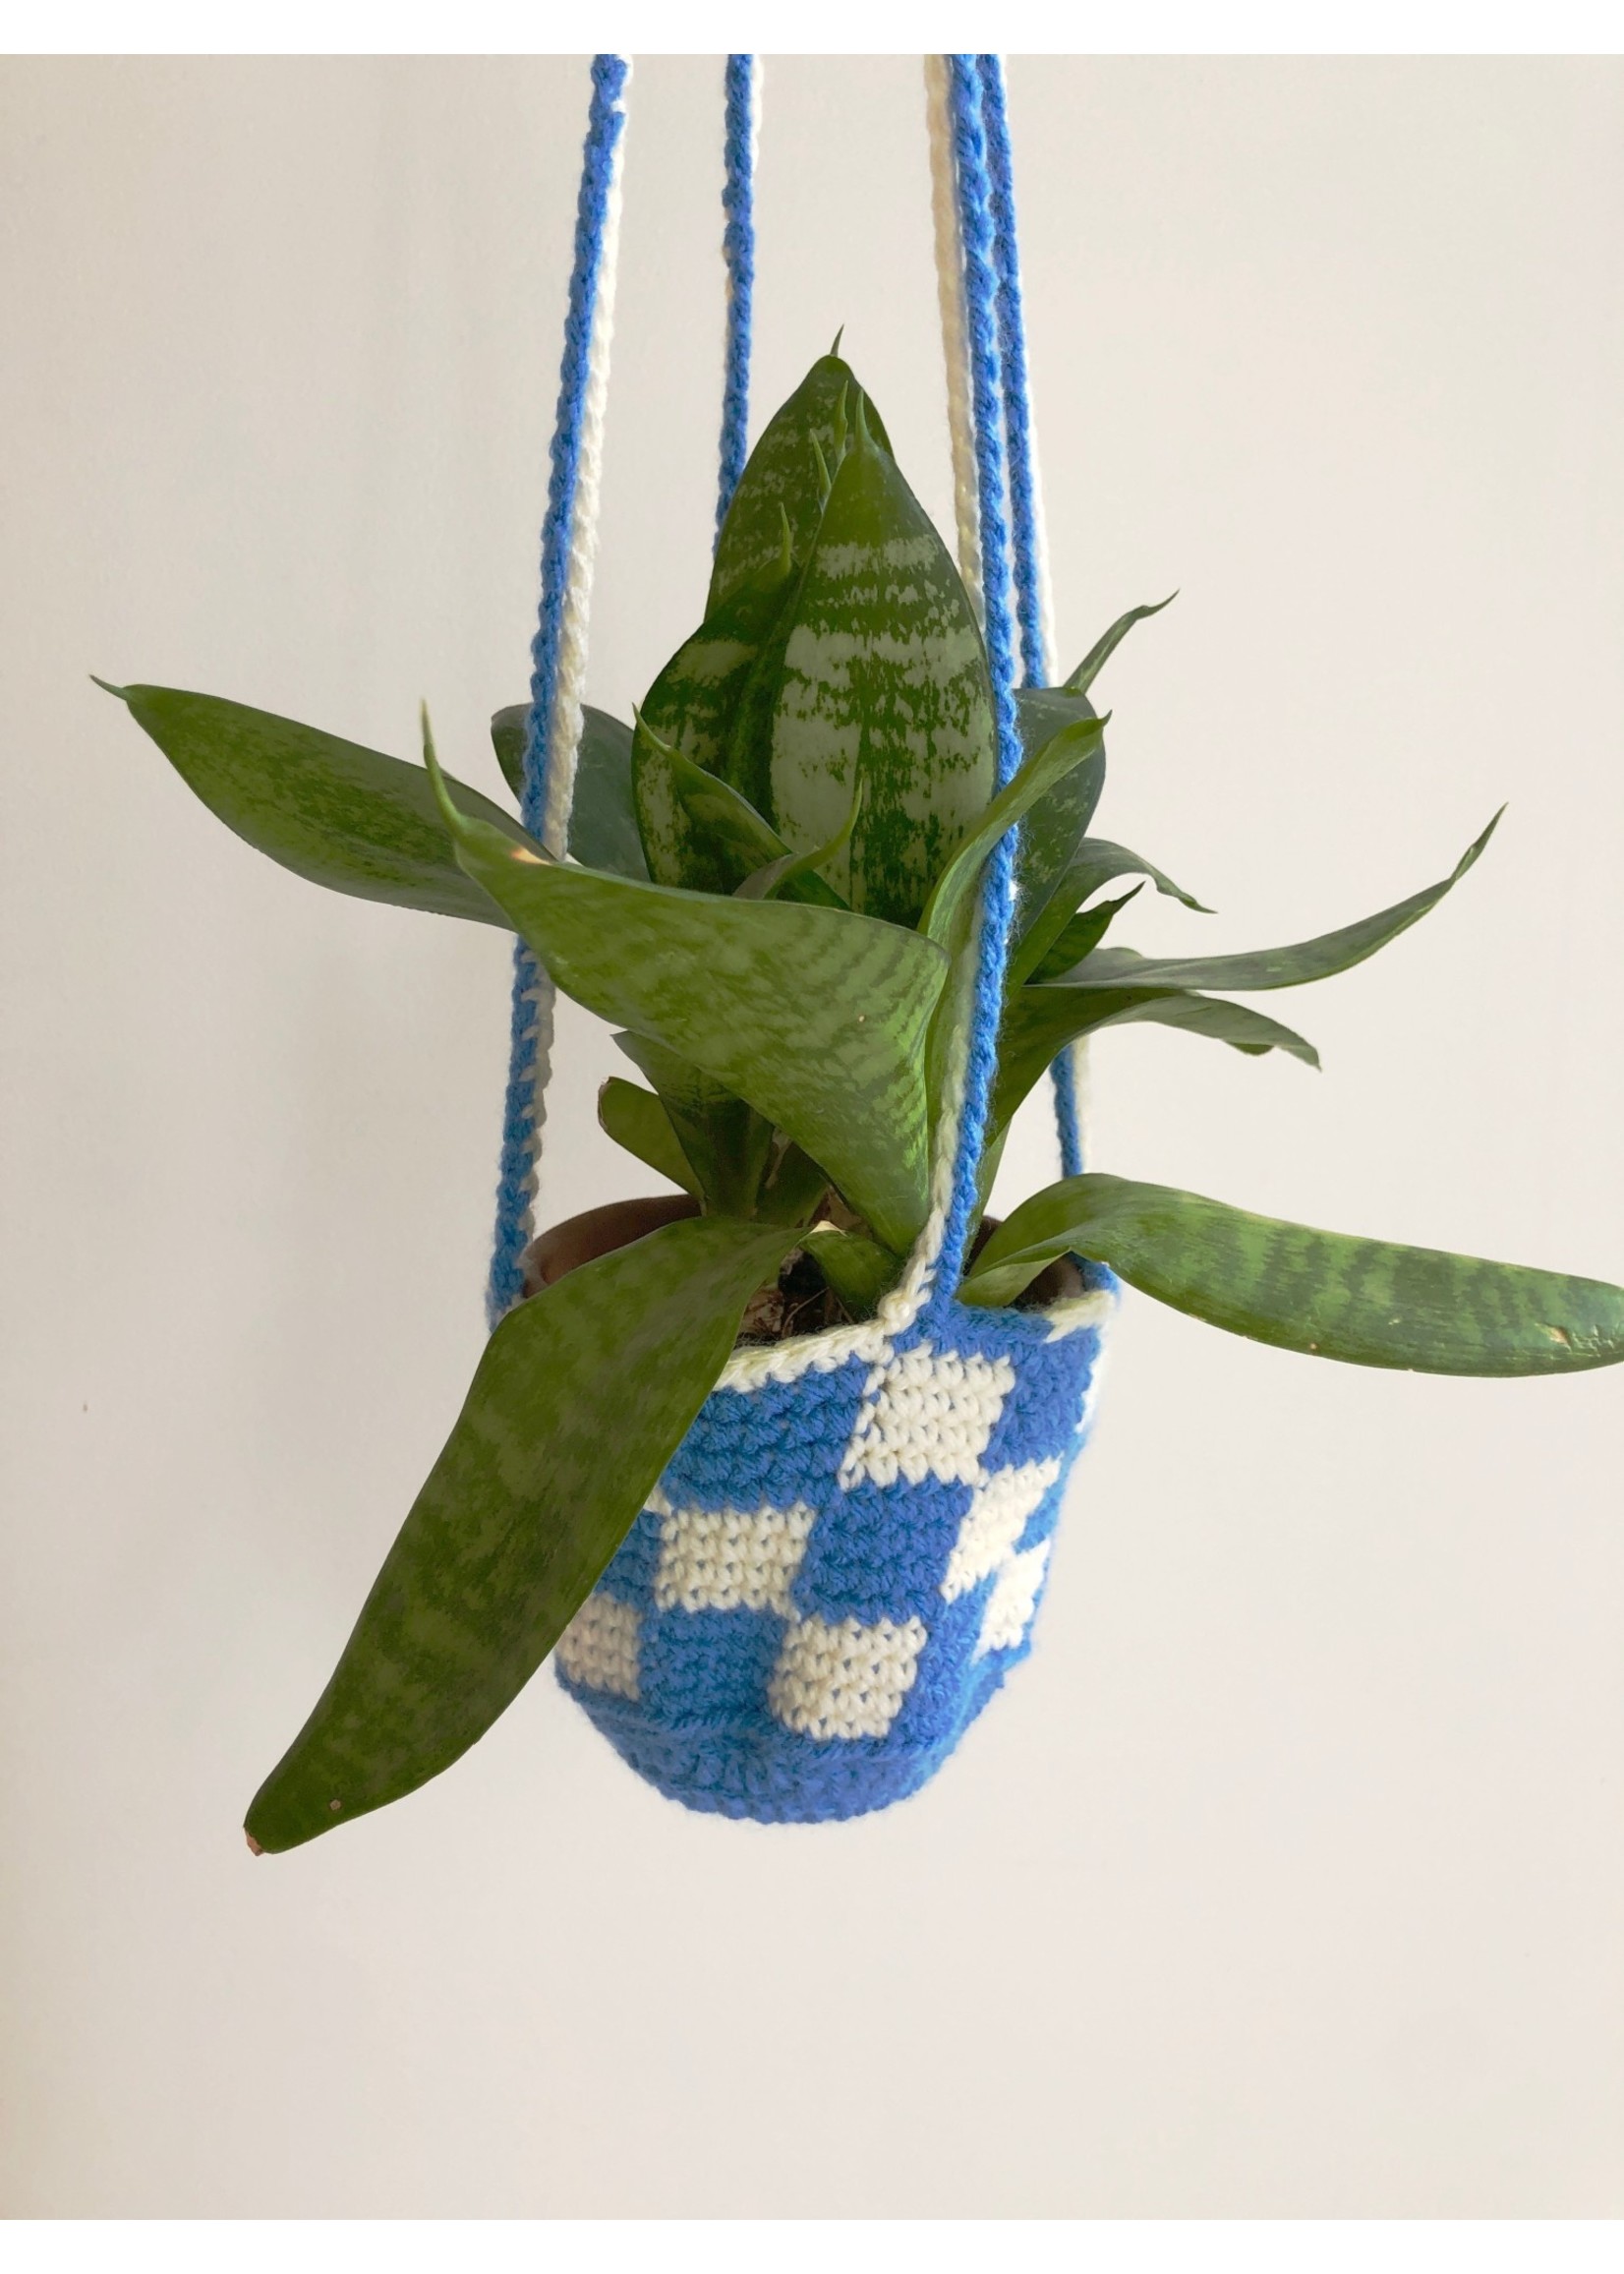 Slow May Checkered Crochet Plant Hangers by Slow May